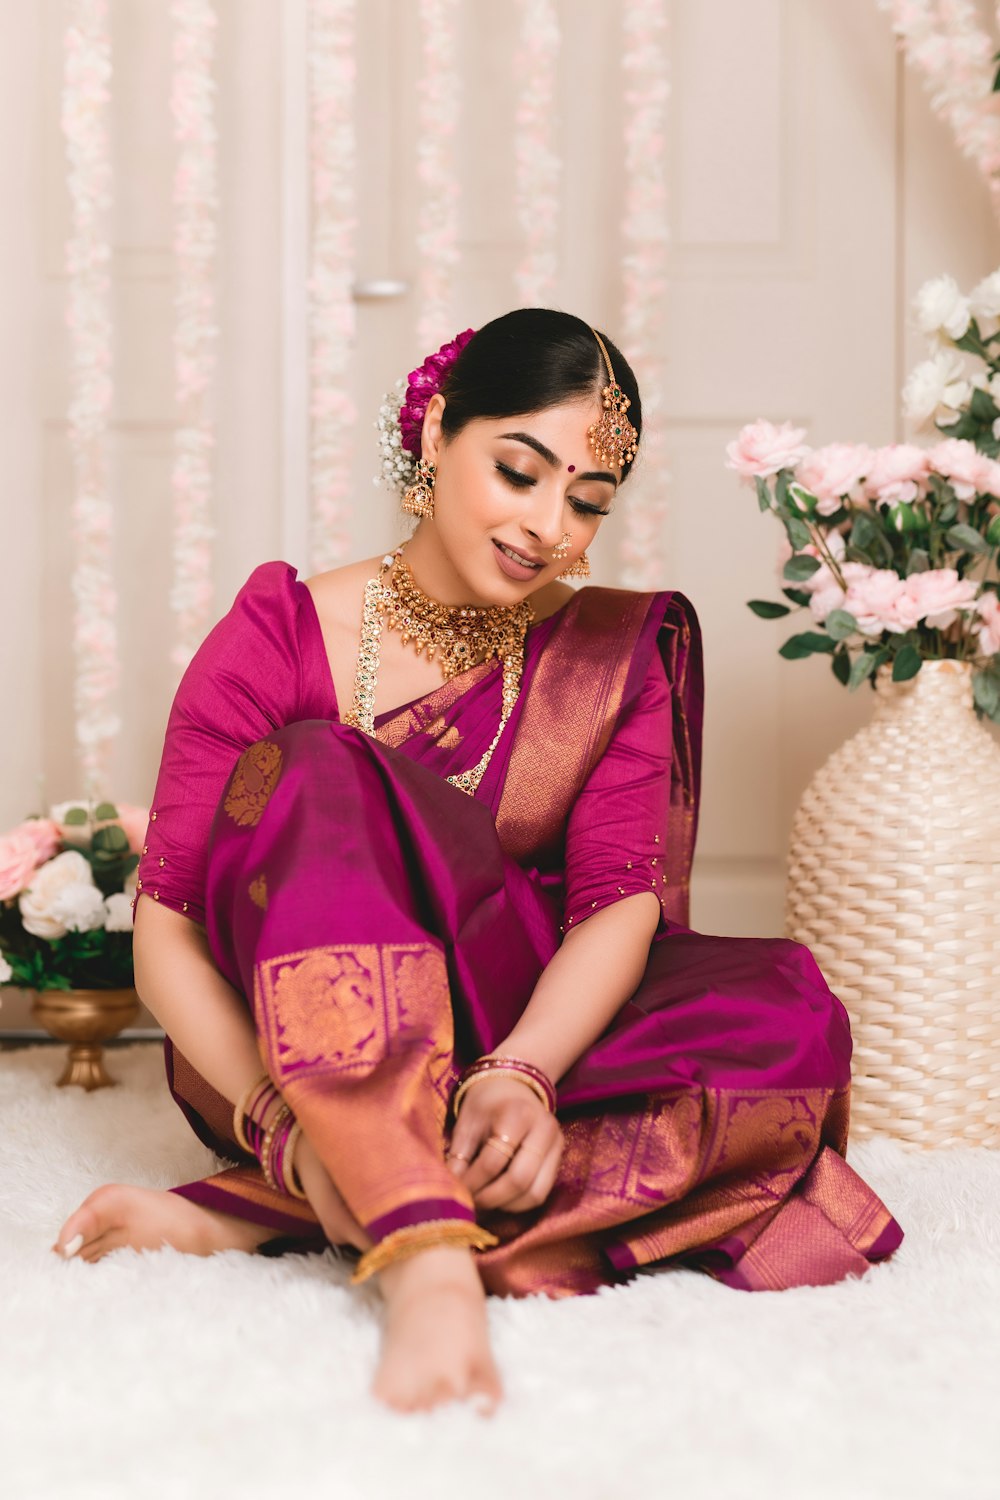 a woman in a pink sari sitting on a white rug